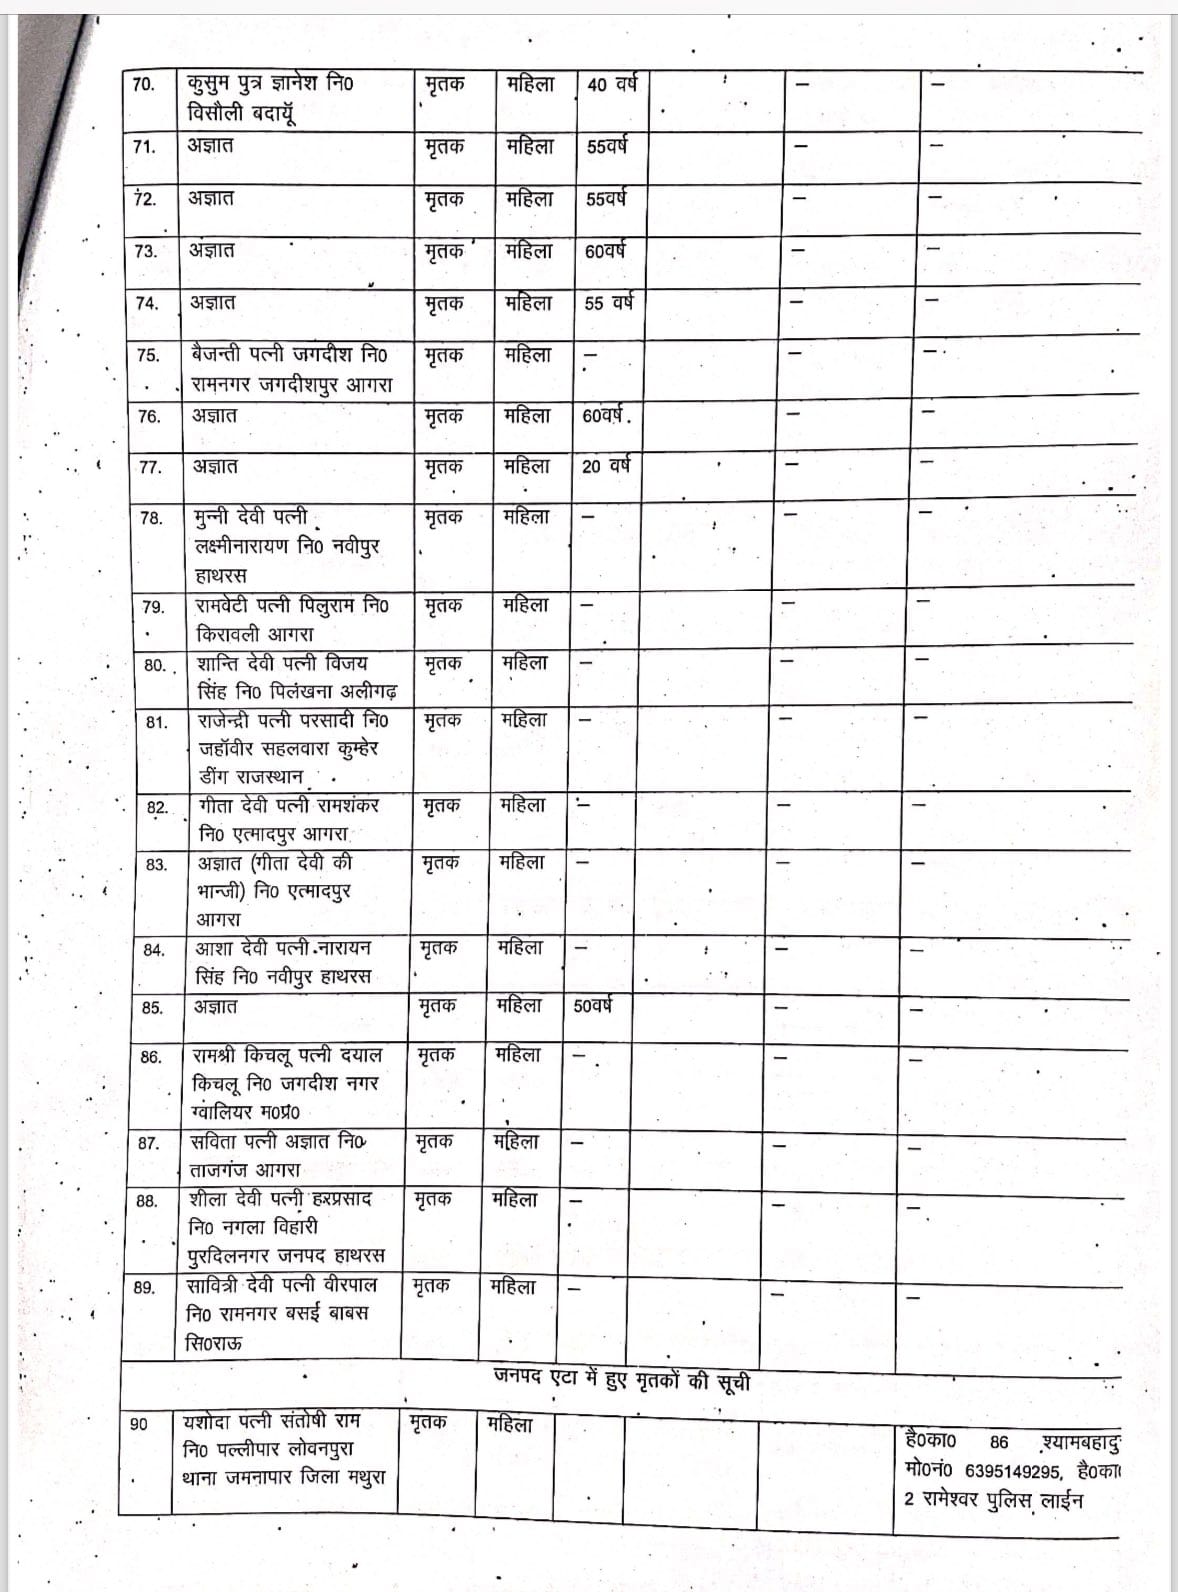 hathras satsang stampede update list of 116 dead body names and helpline numbers released by administration